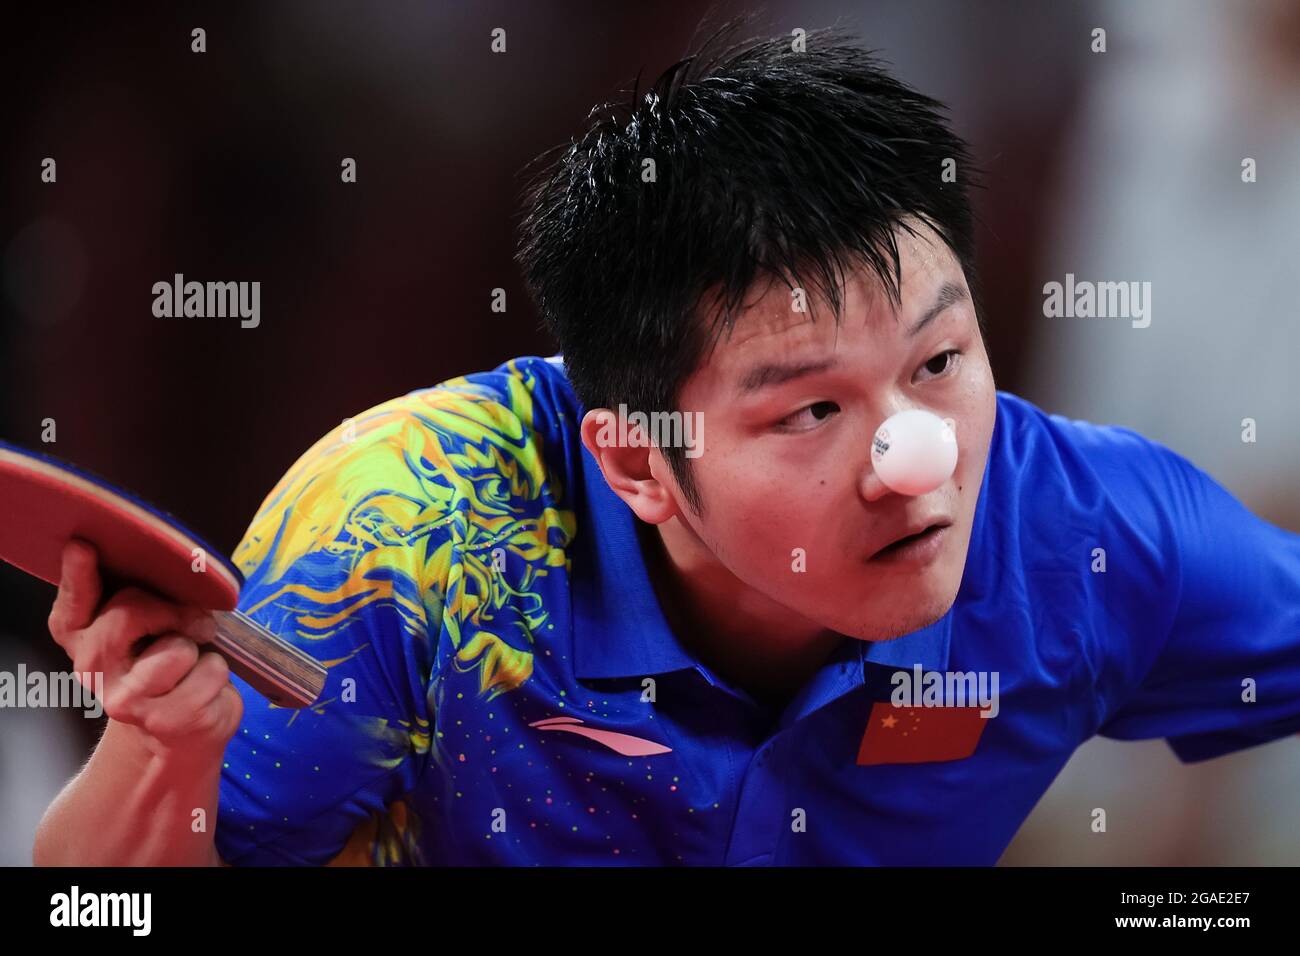 Tokyo, Japan. 30th July, 2021. Fan Zhendong serves during the Men's Table Tennis Singles Gold Medal Match between Fan Zhendong of China and Ma Long of China on Day 7 of the Tokyo 2020 Olympic Games. Credit: Pete Dovgan/Speed Media/Alamy Live News Stock Photo